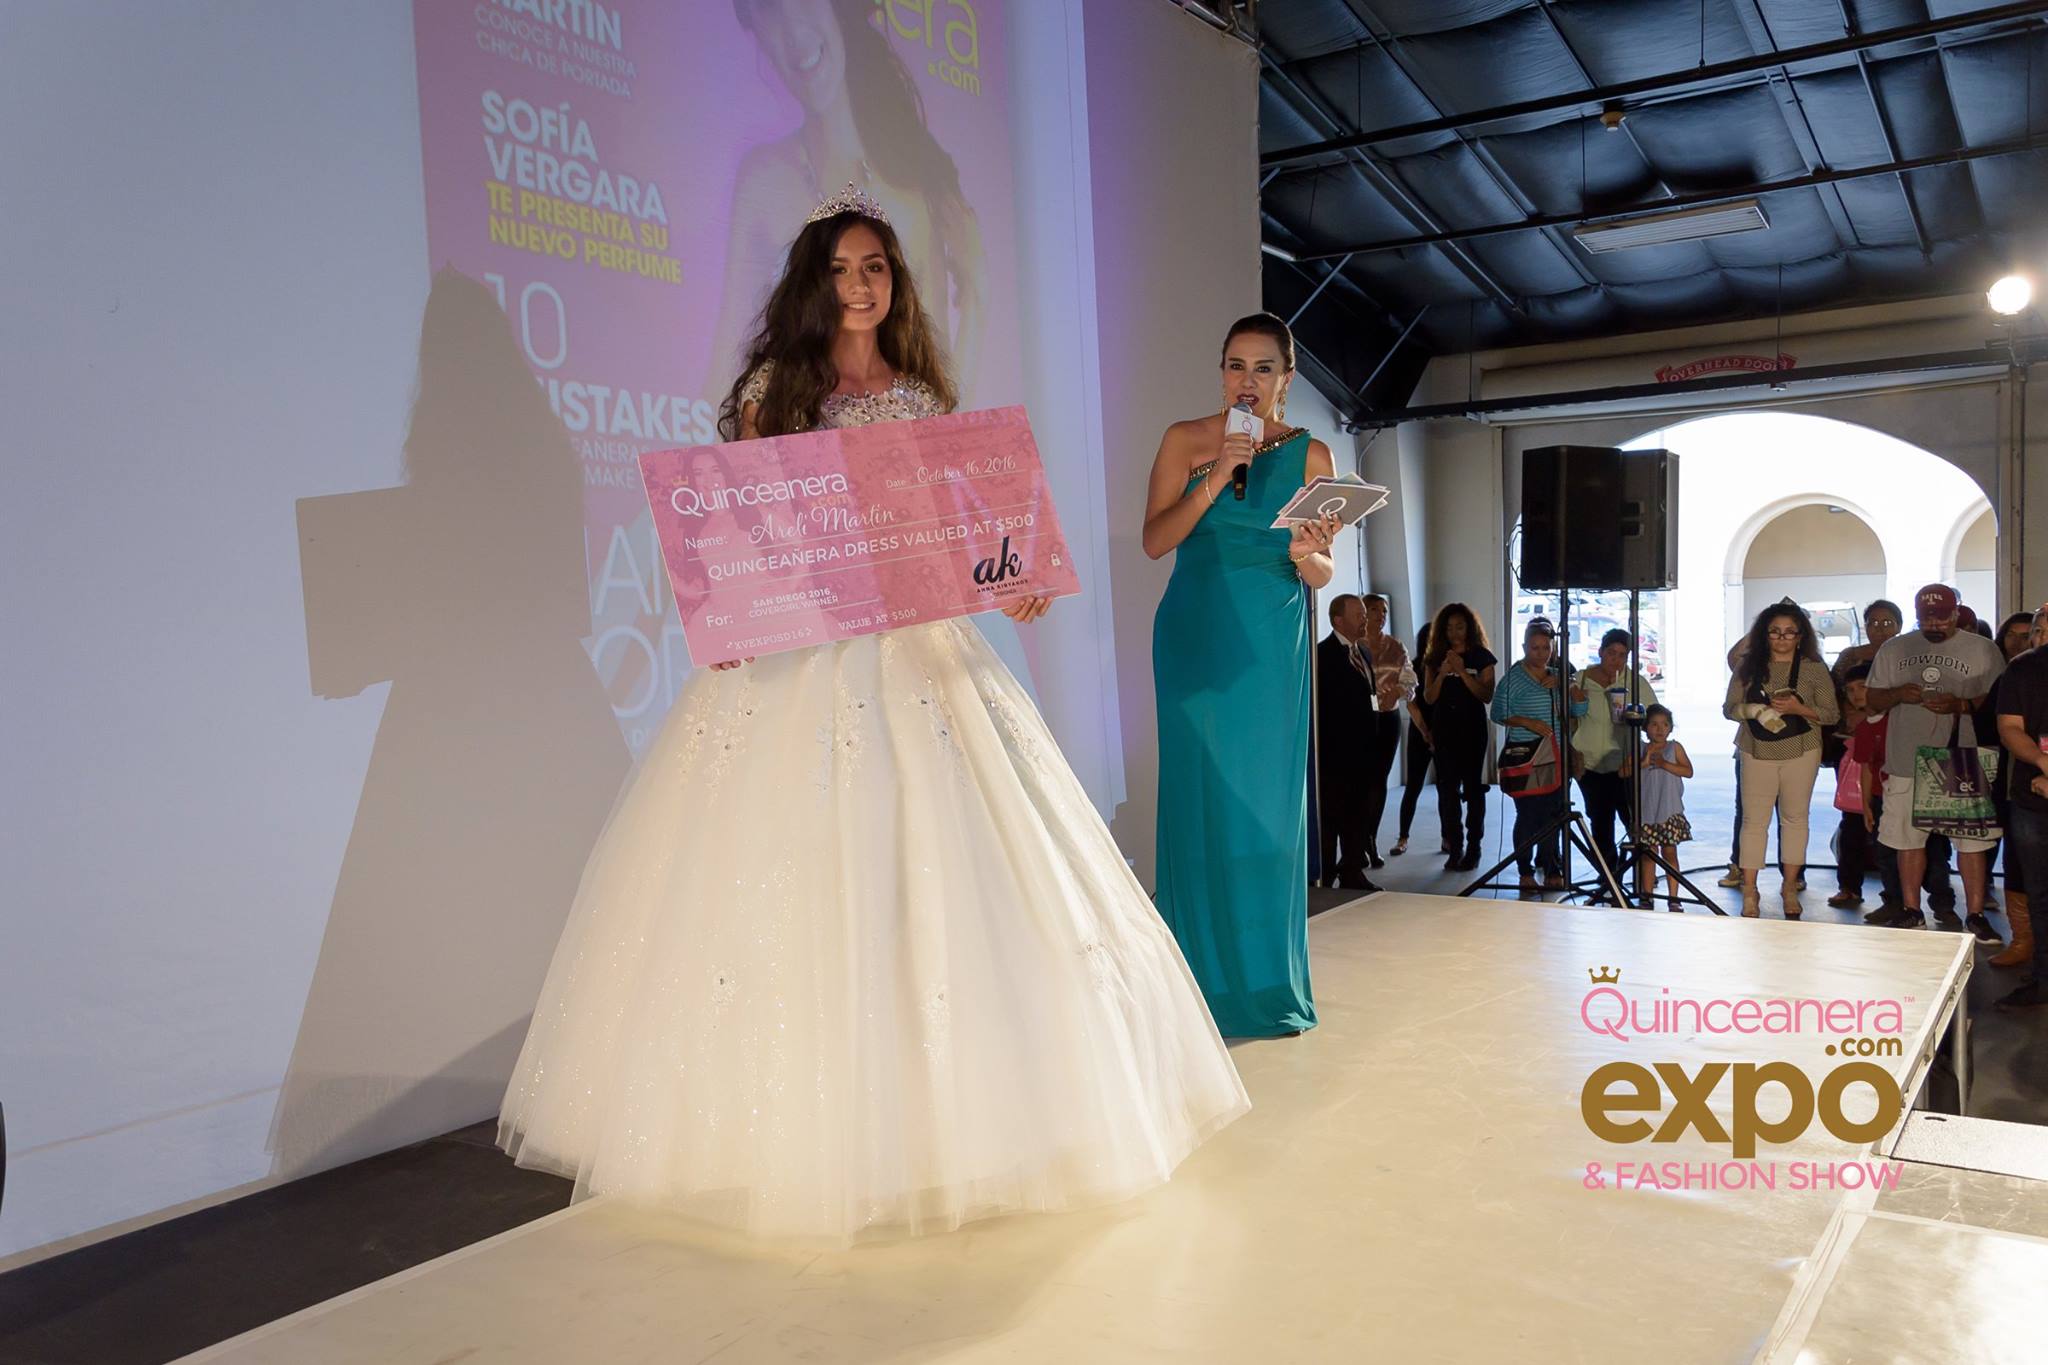 Win Prizes at the Quinceanera.com Fashion Show & Expo - San Diego